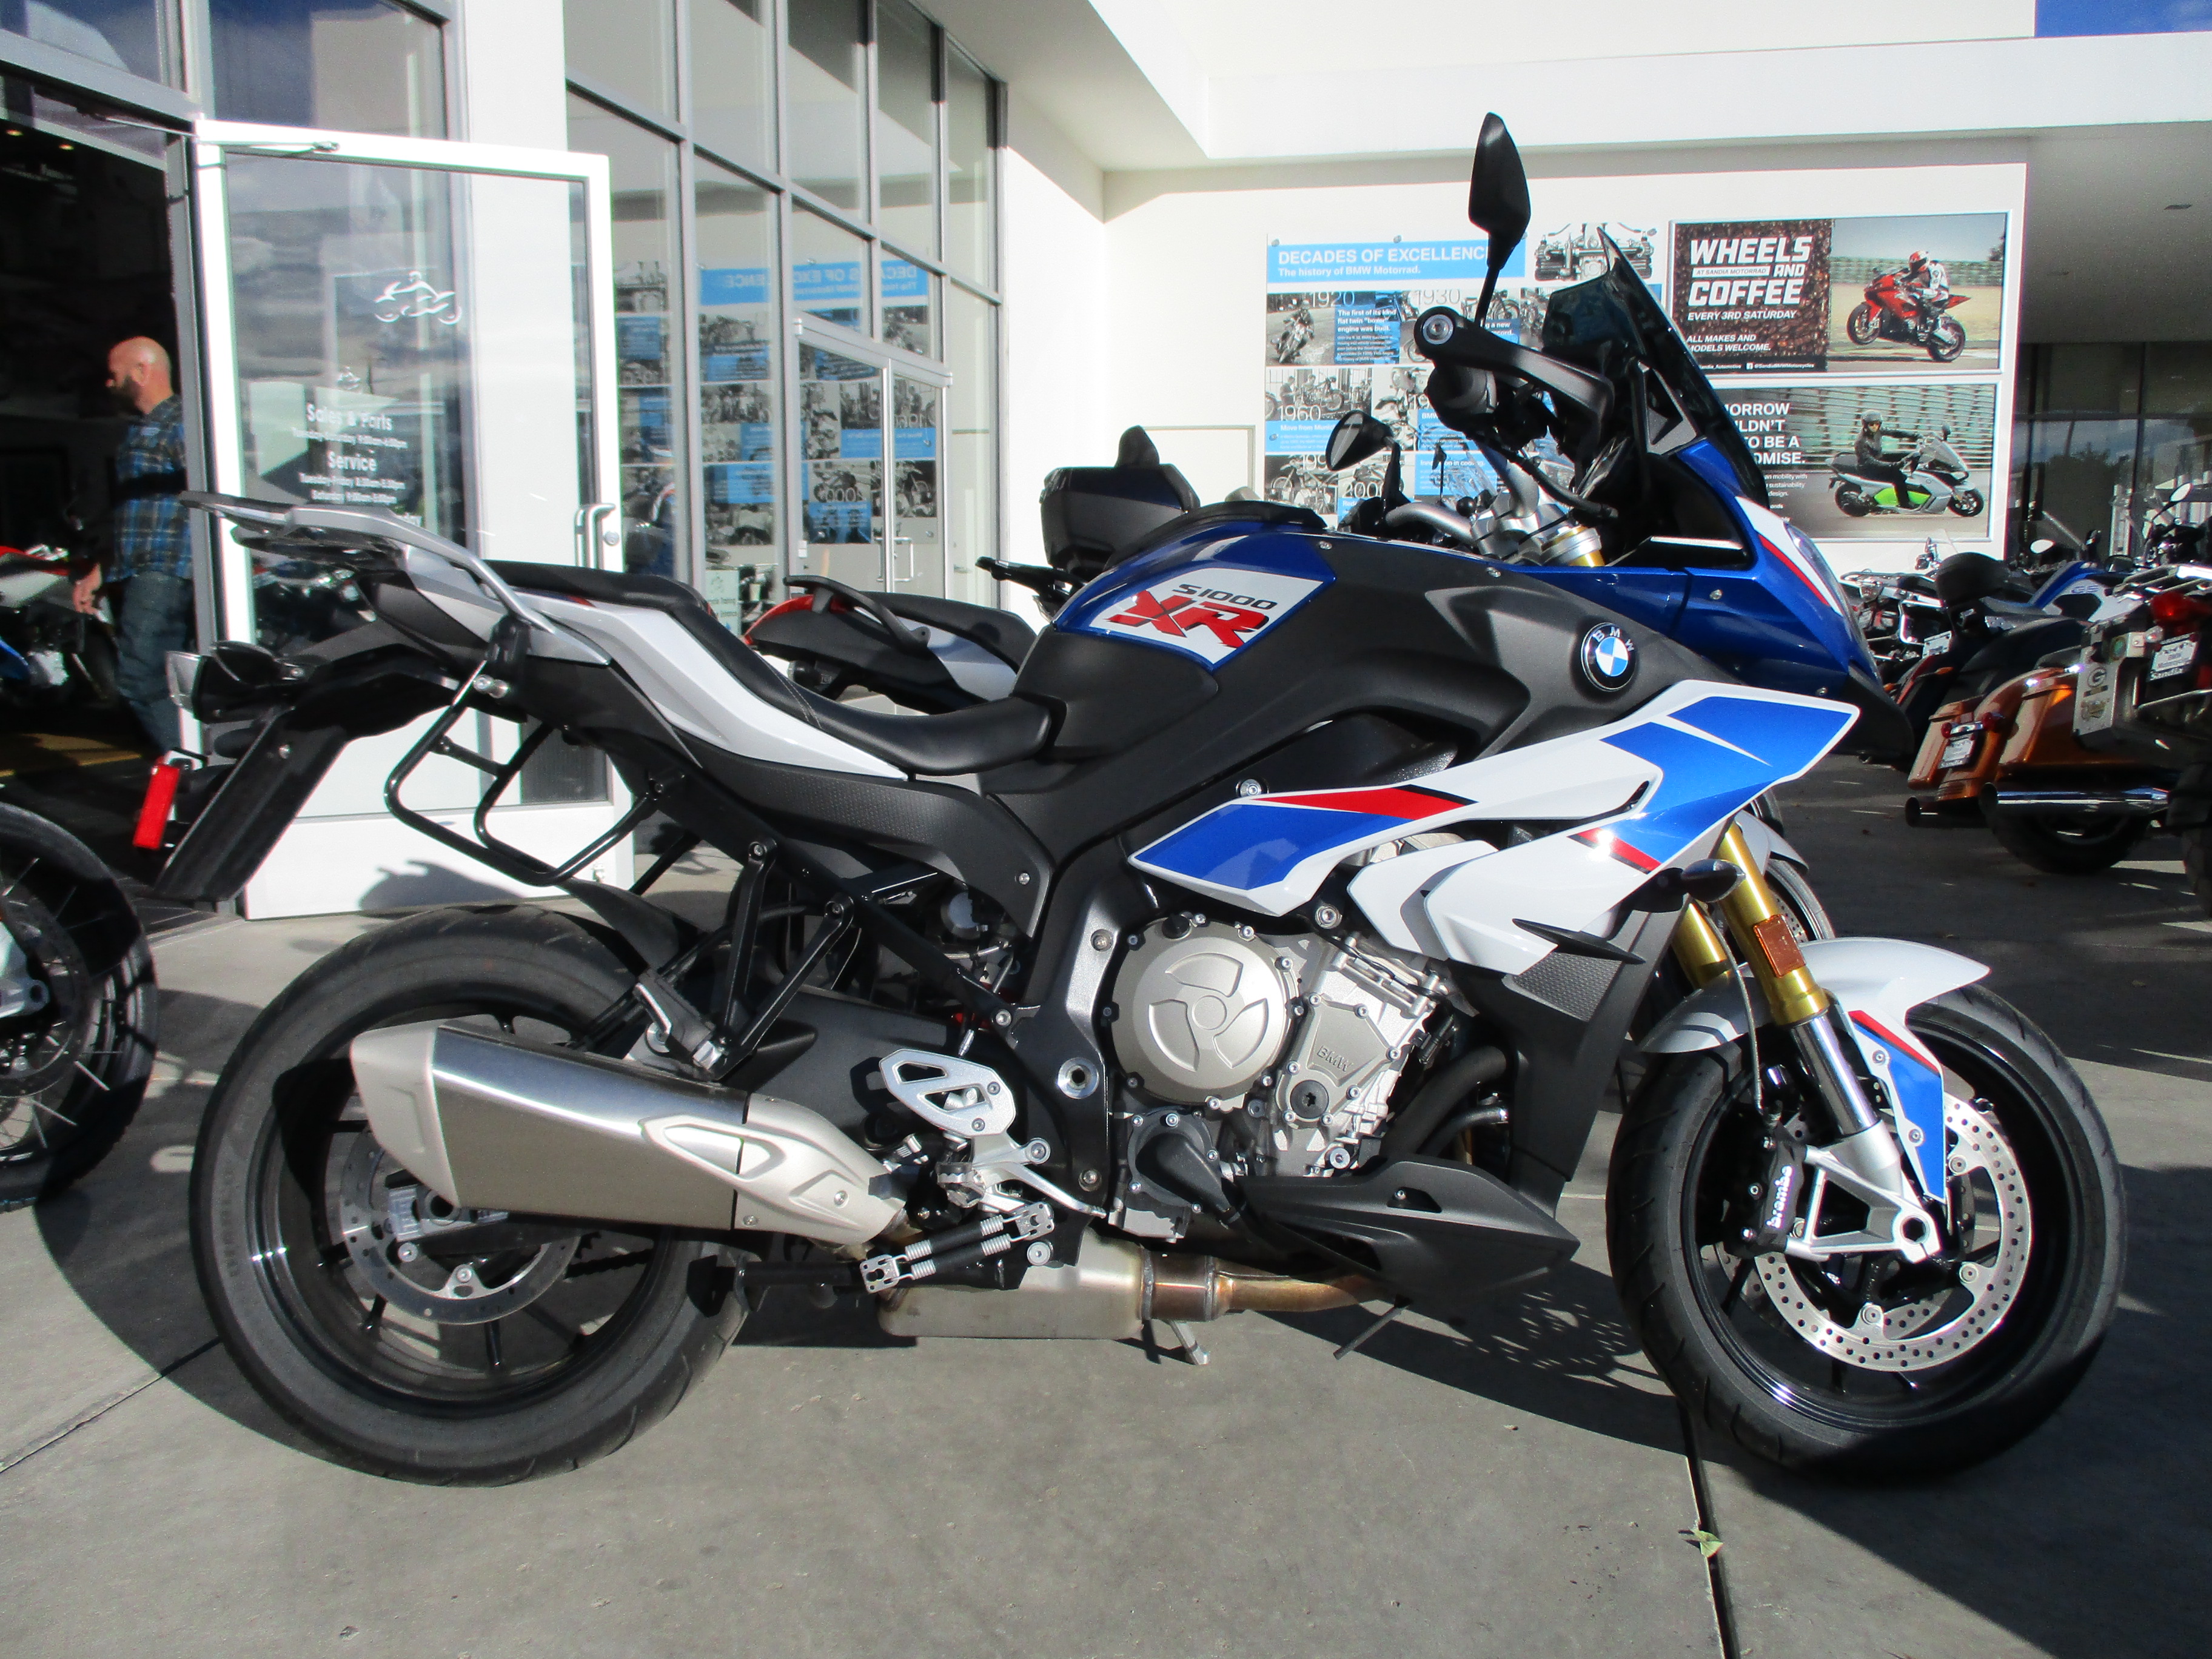 Pre-Owned Motorcycle Inventory - S1000XR - Santa Fe BMW Motorcycles